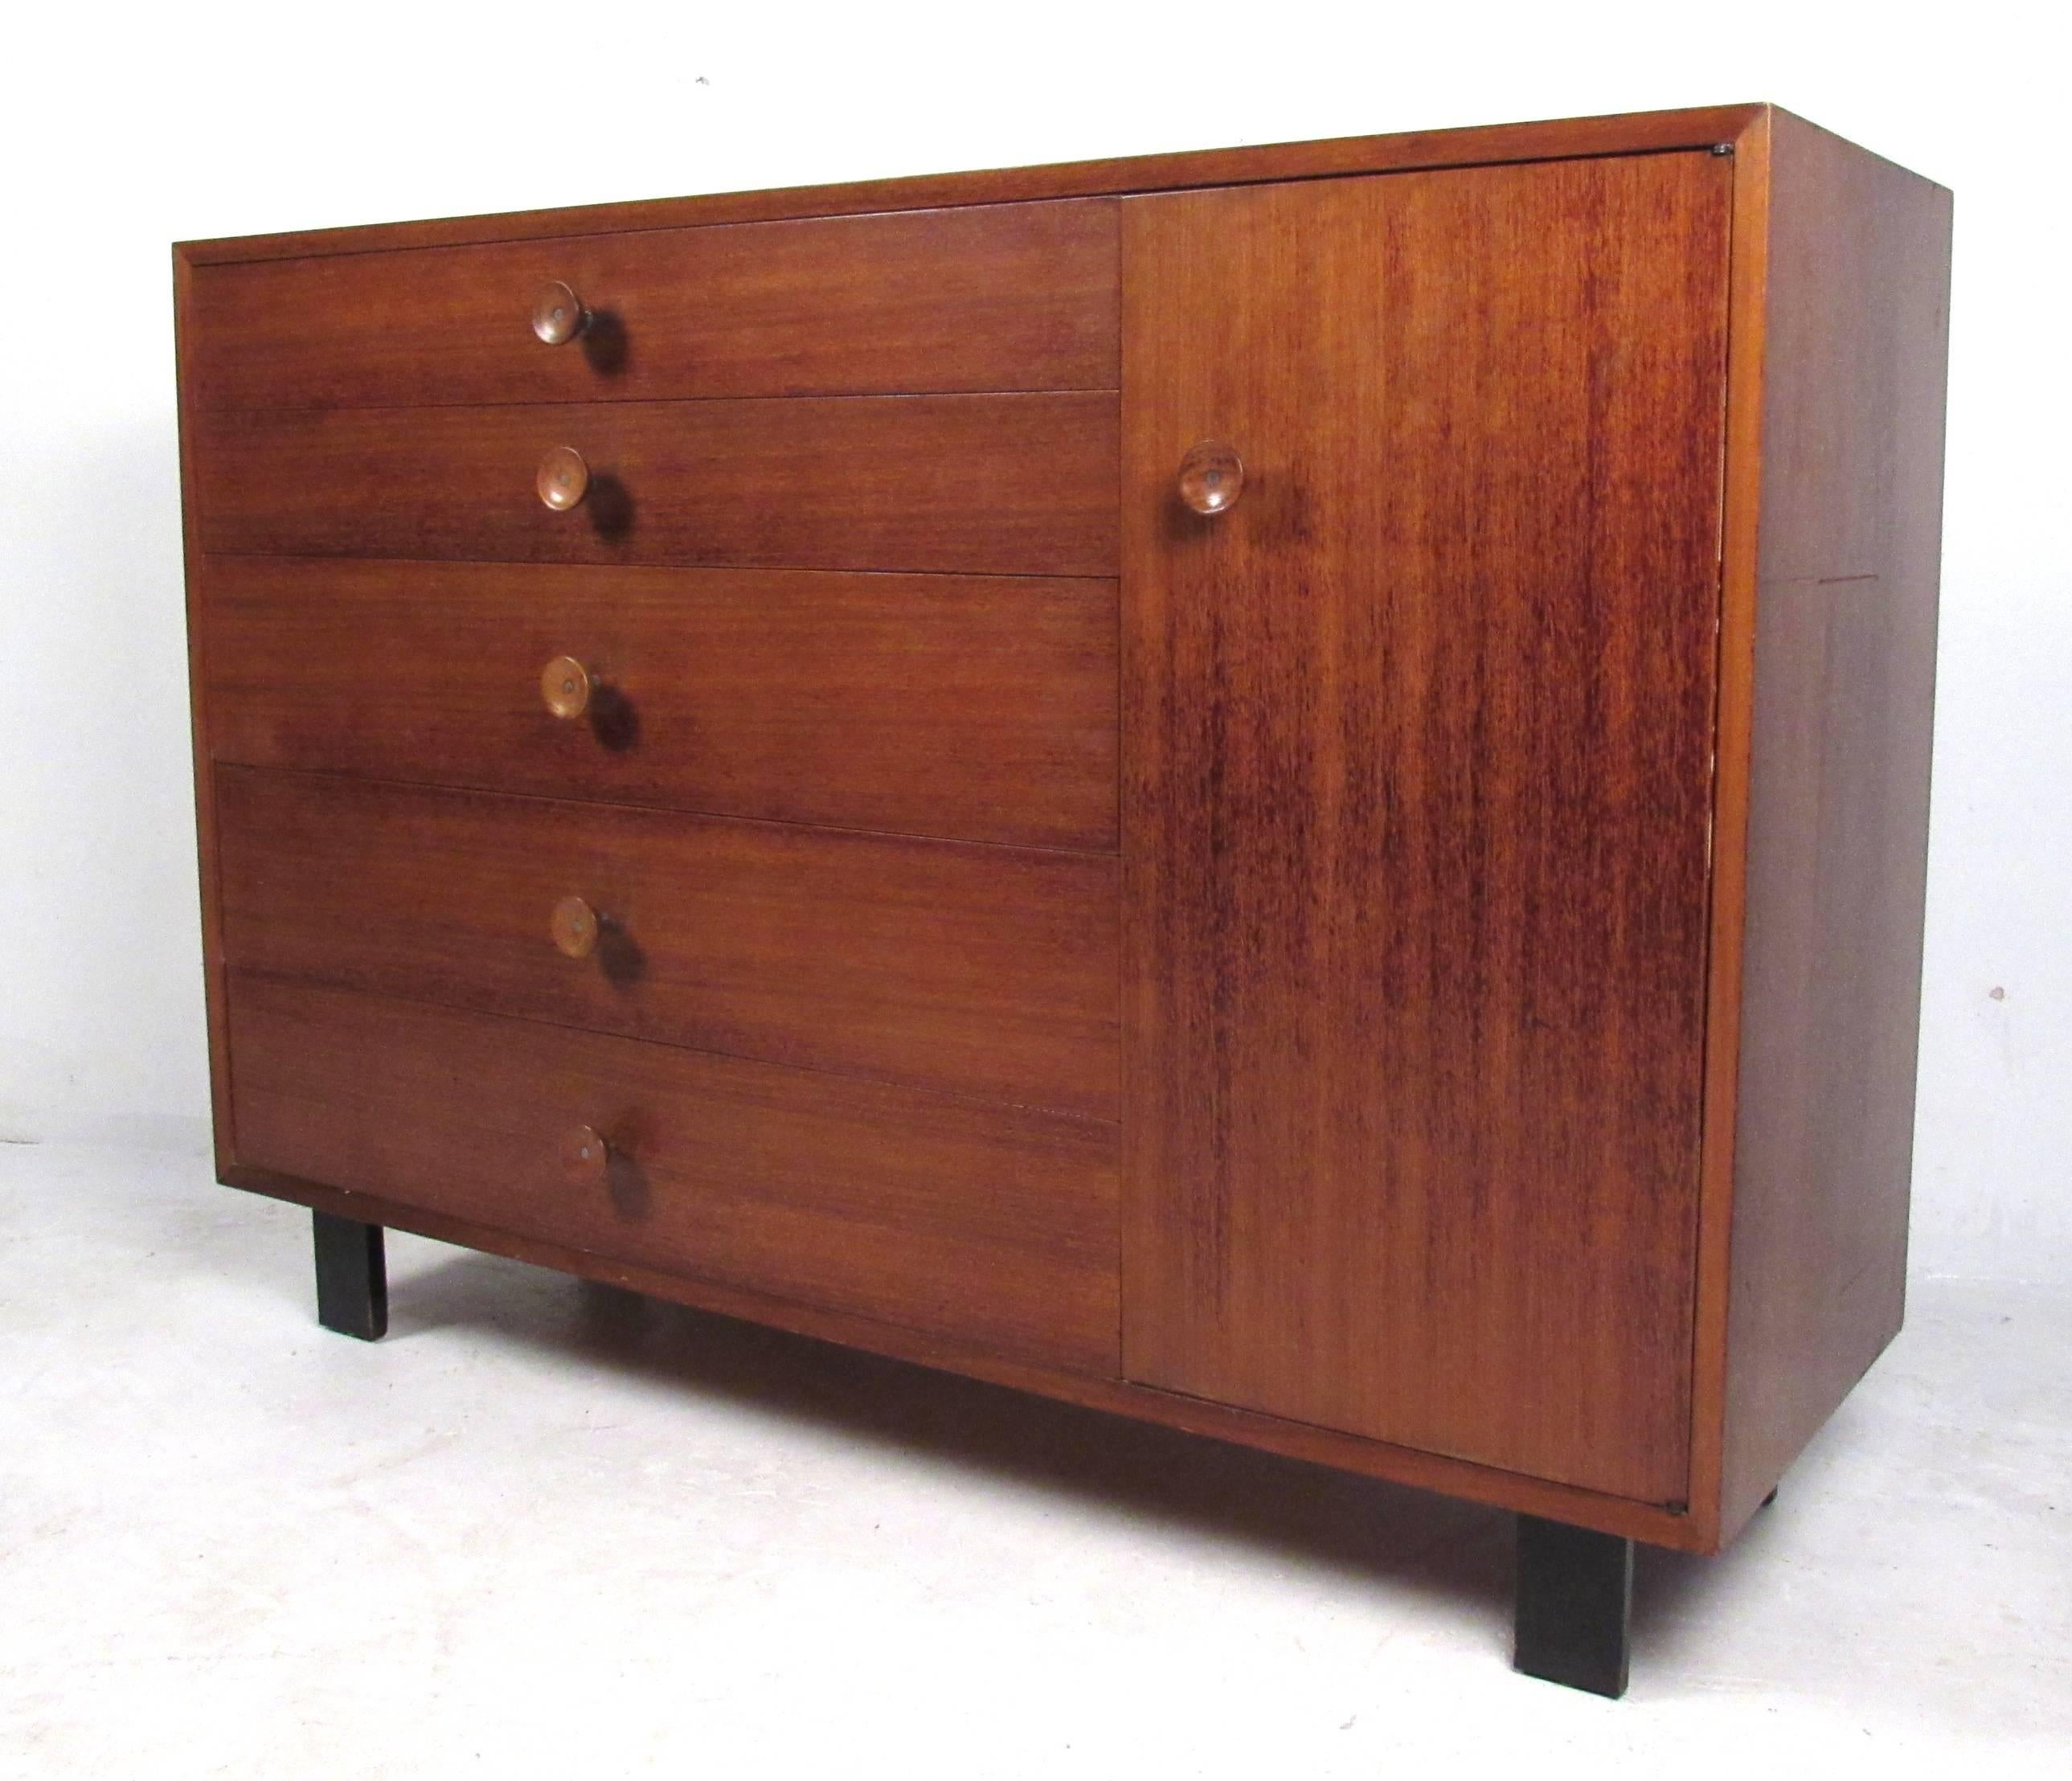 From Herman Miller's Basic Cabinet Series, a vintage George Nelson design with rare walnut & metal pulls. Please confirm item location (NY or NJ) with dealer.